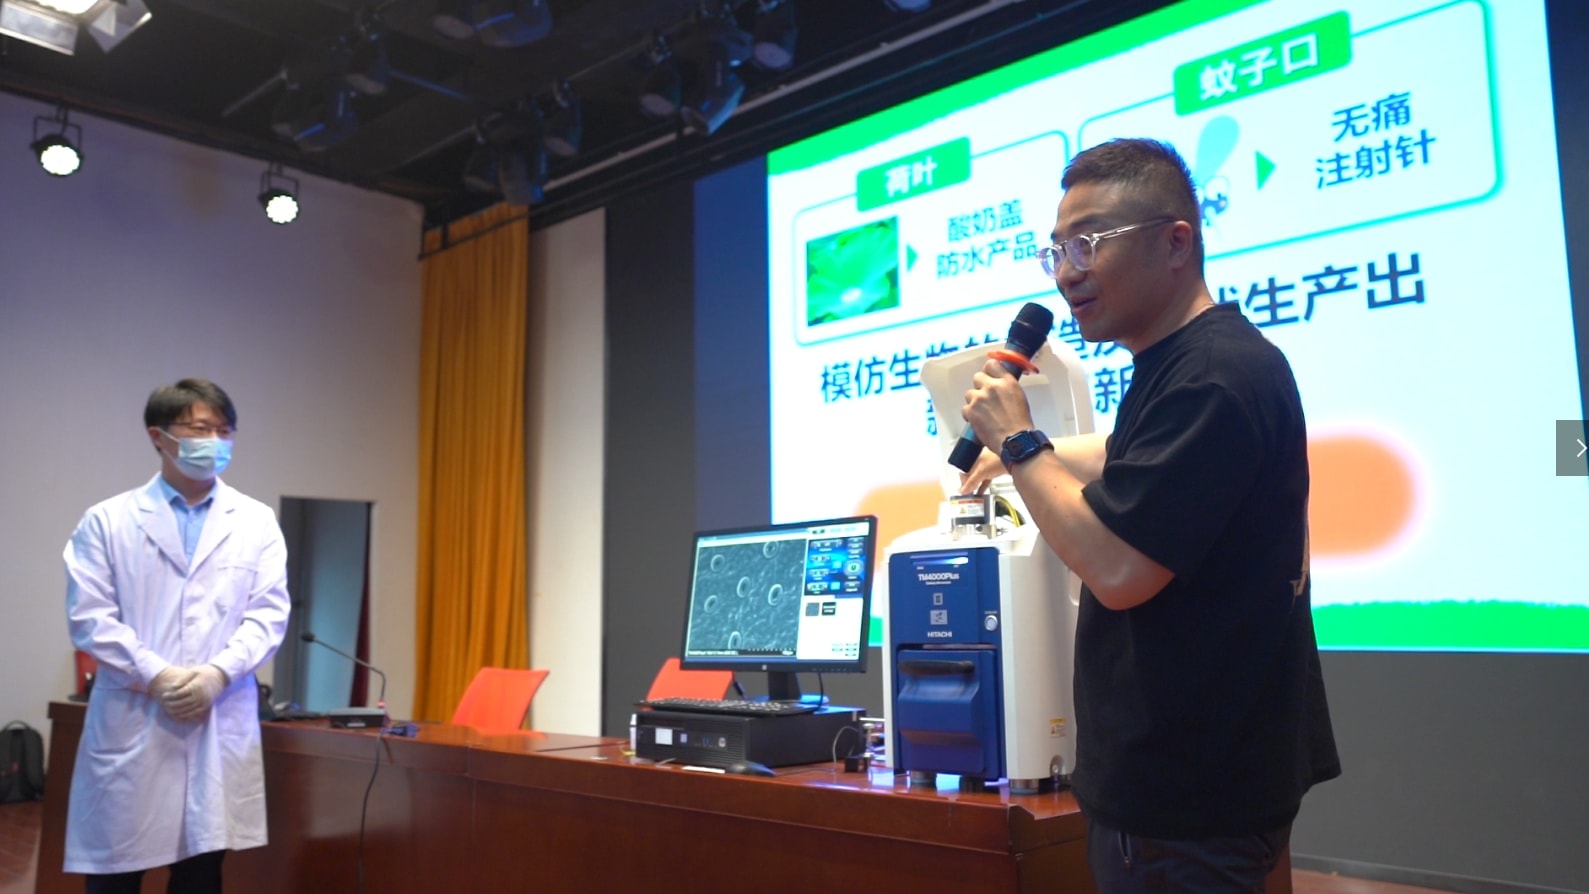 Staff from Hitachi High-Tech Shanghai lecture on the Electron Microscope